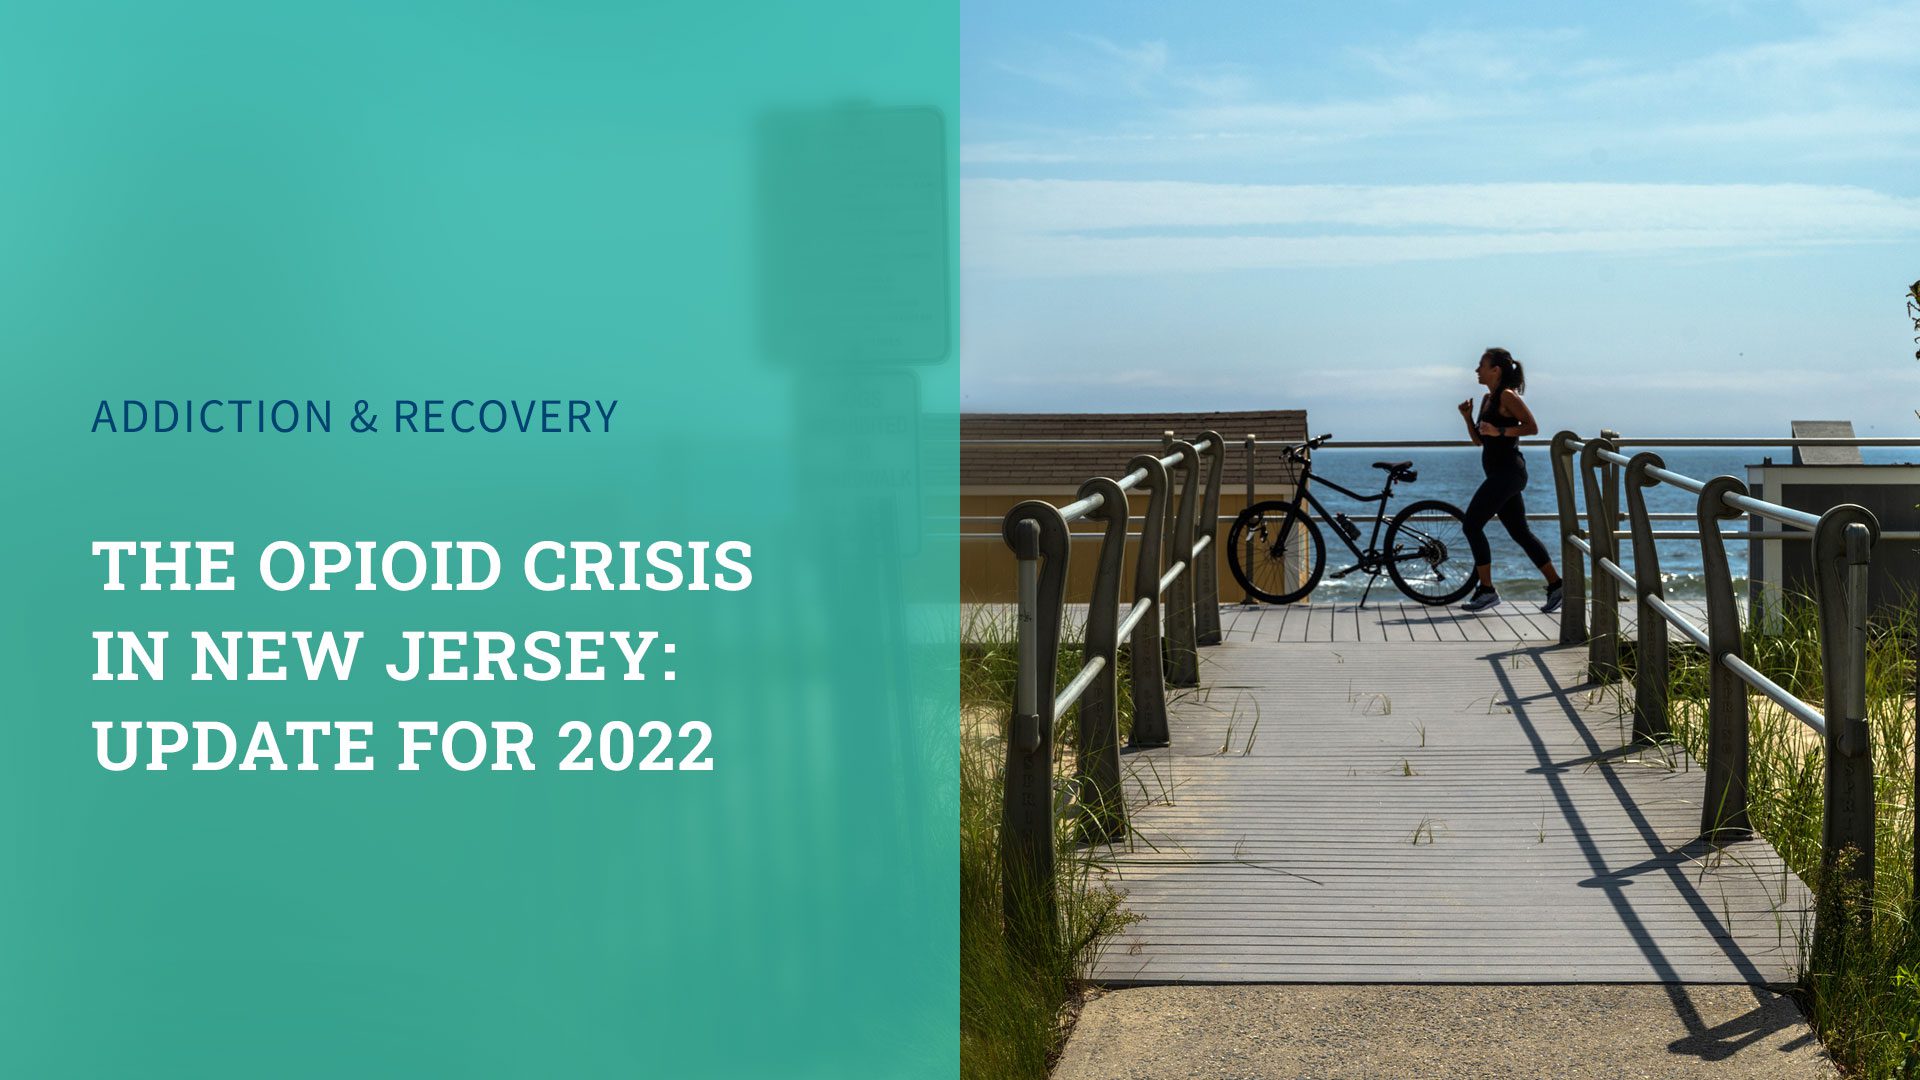 The Opioid Crisis in New Jersey: Update for 2022